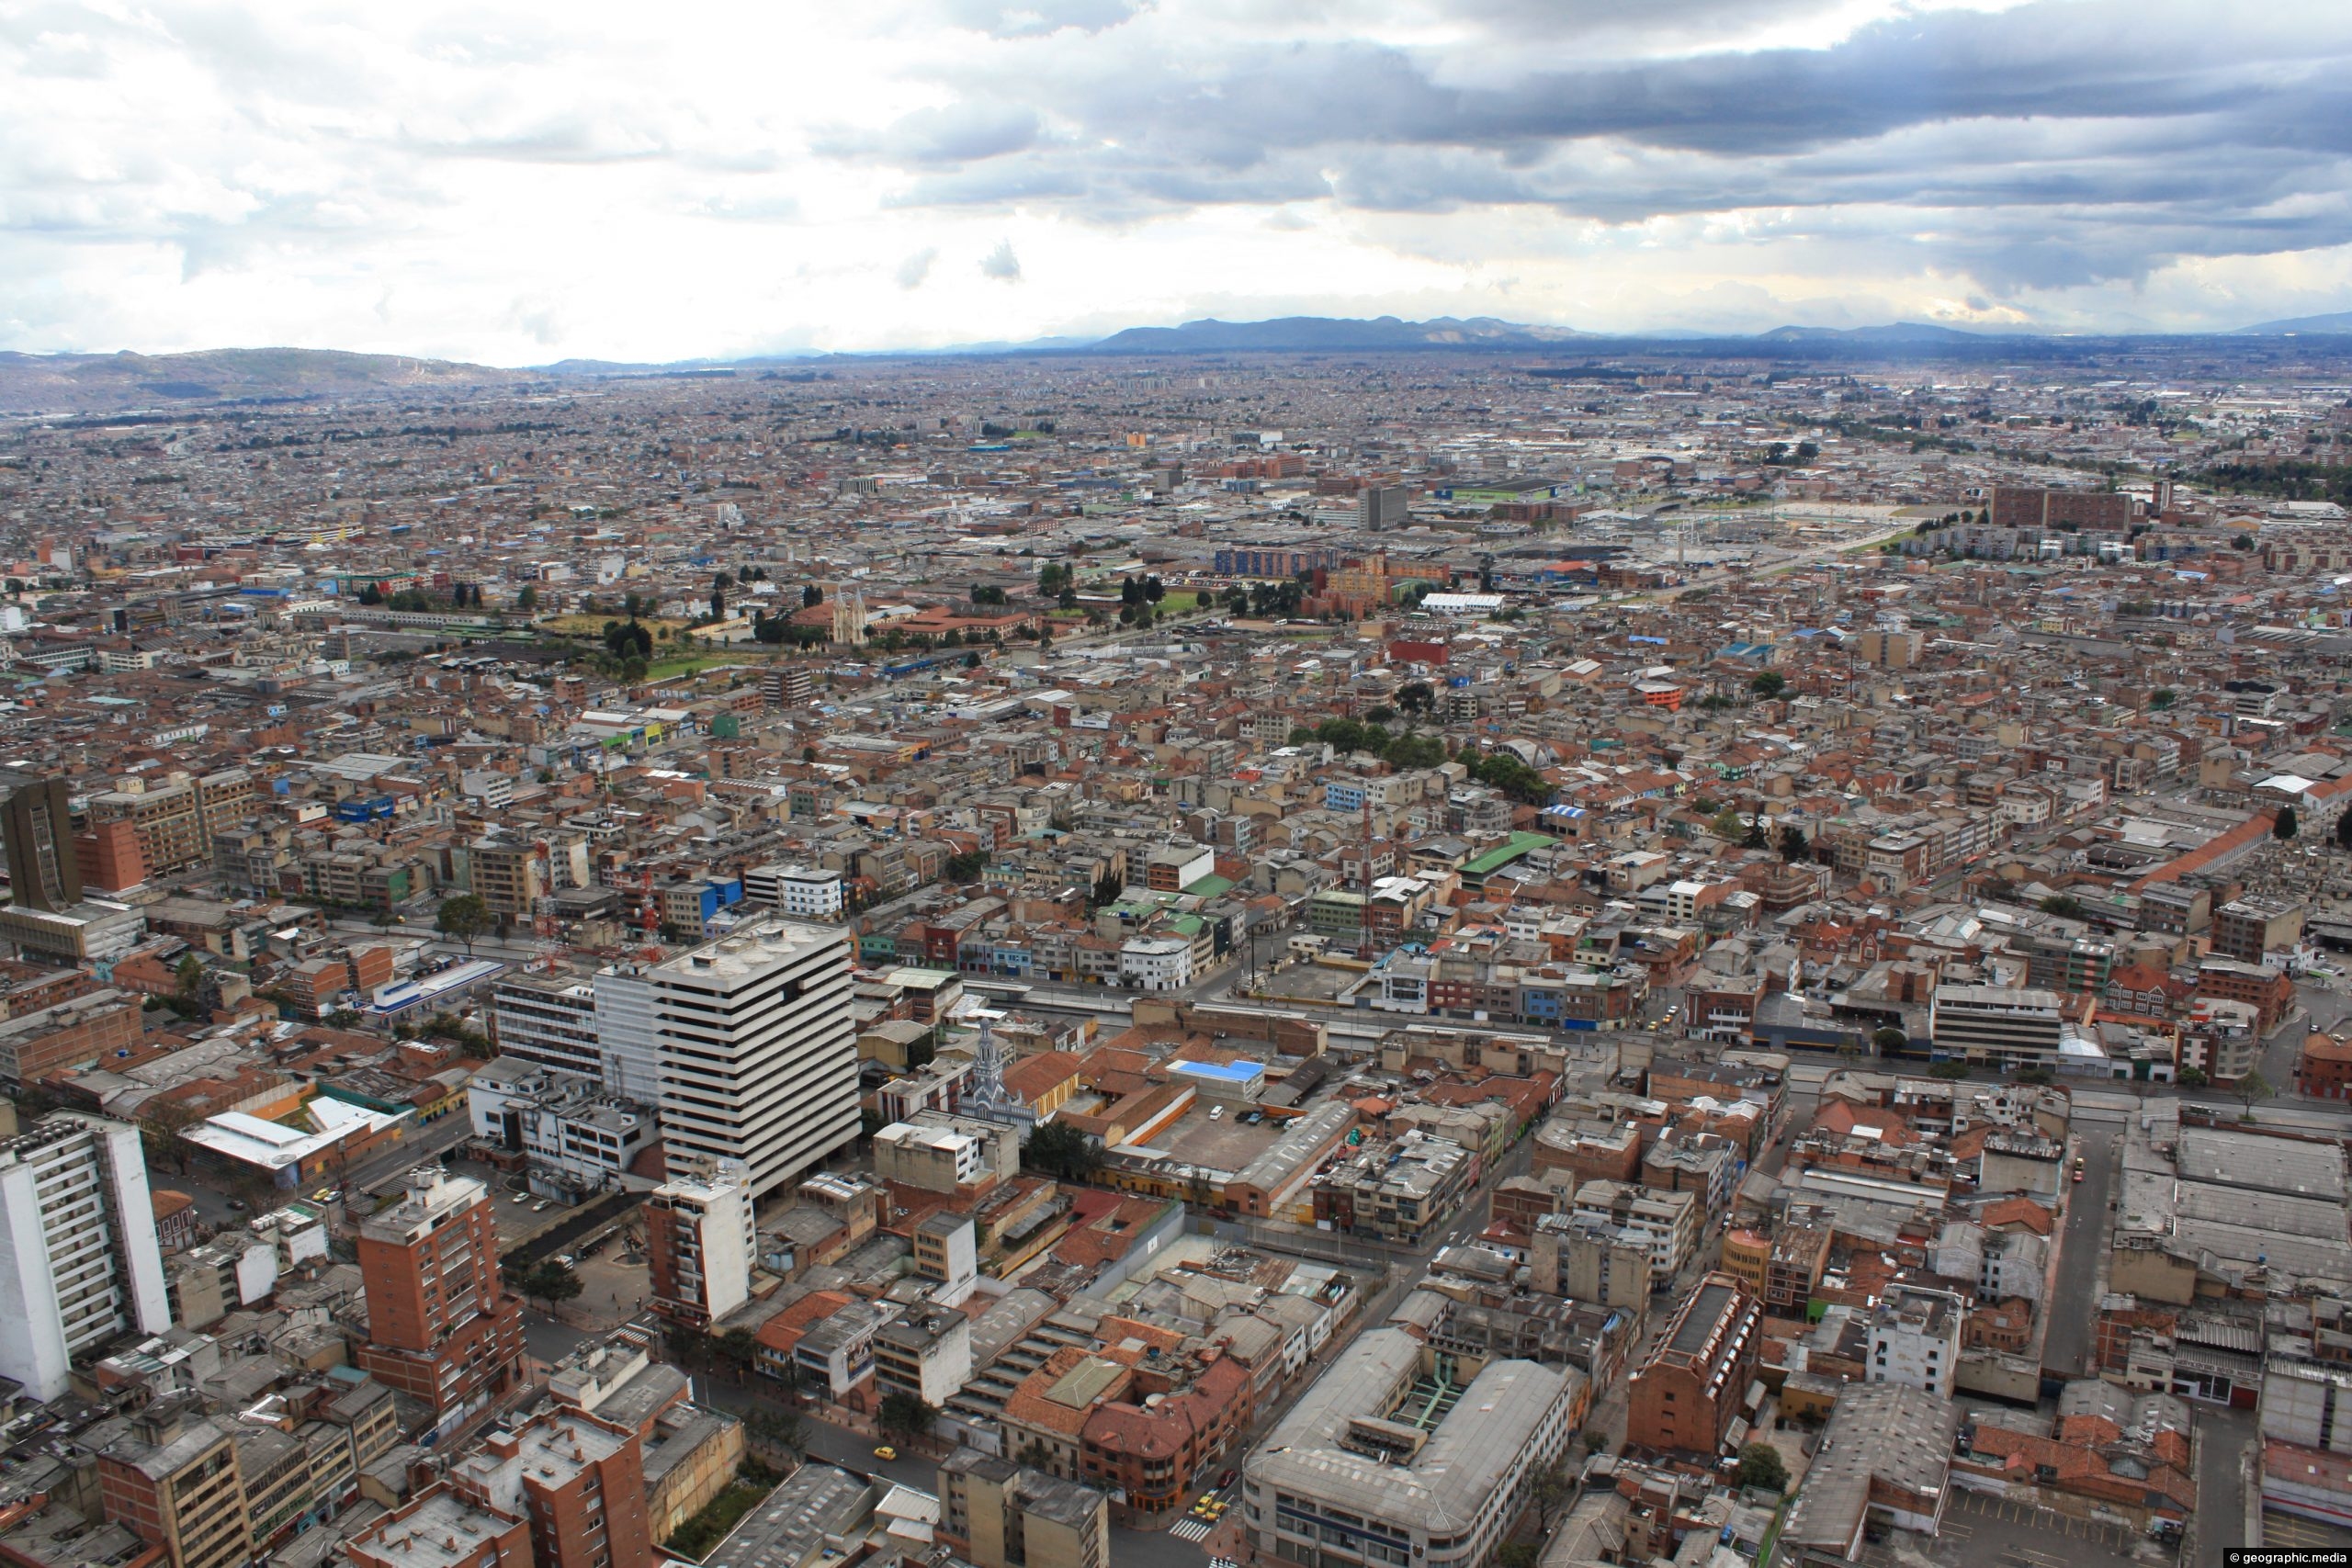 South-western Bogota in Colombia